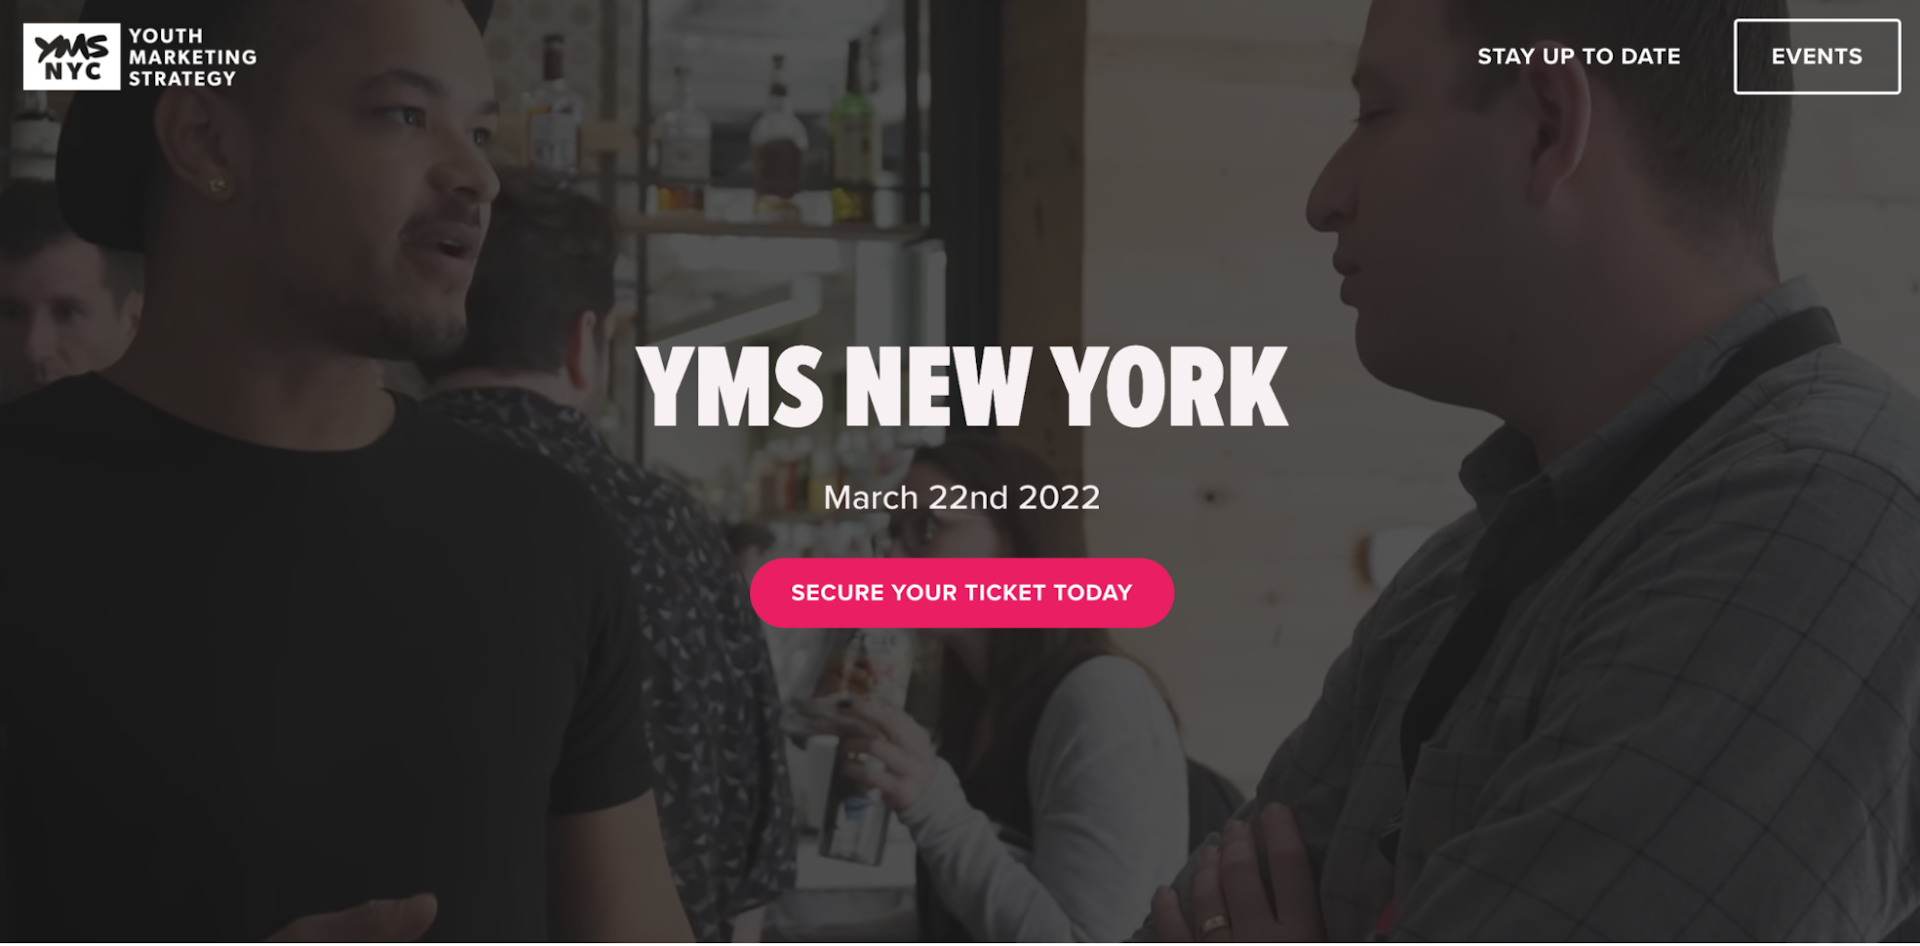 Event registration page for YMS New York